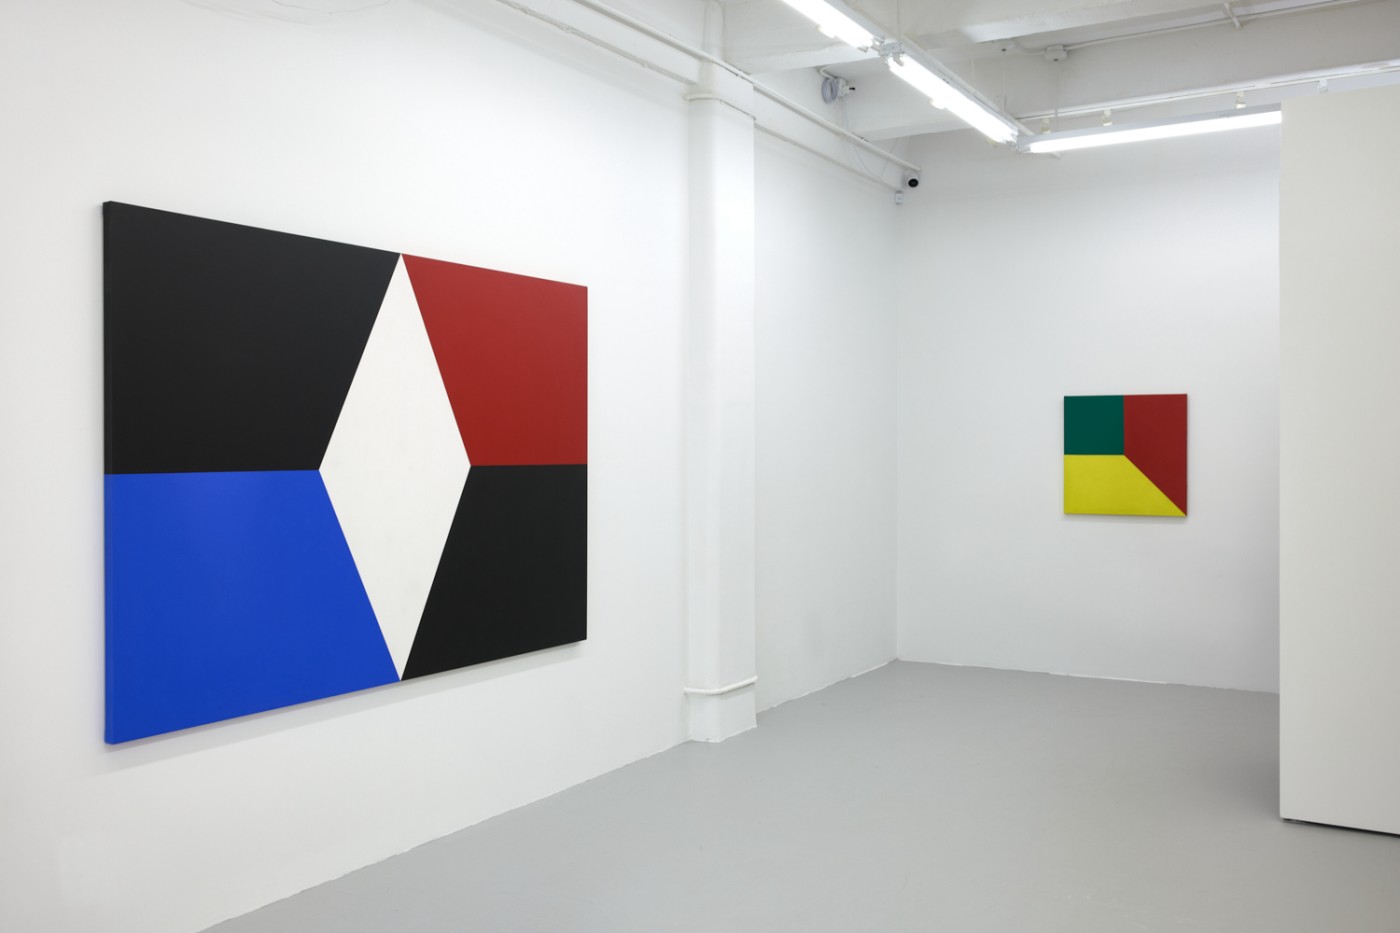 Installation image for Dean Fleming: Fourth Dimension, at David Richard Gallery